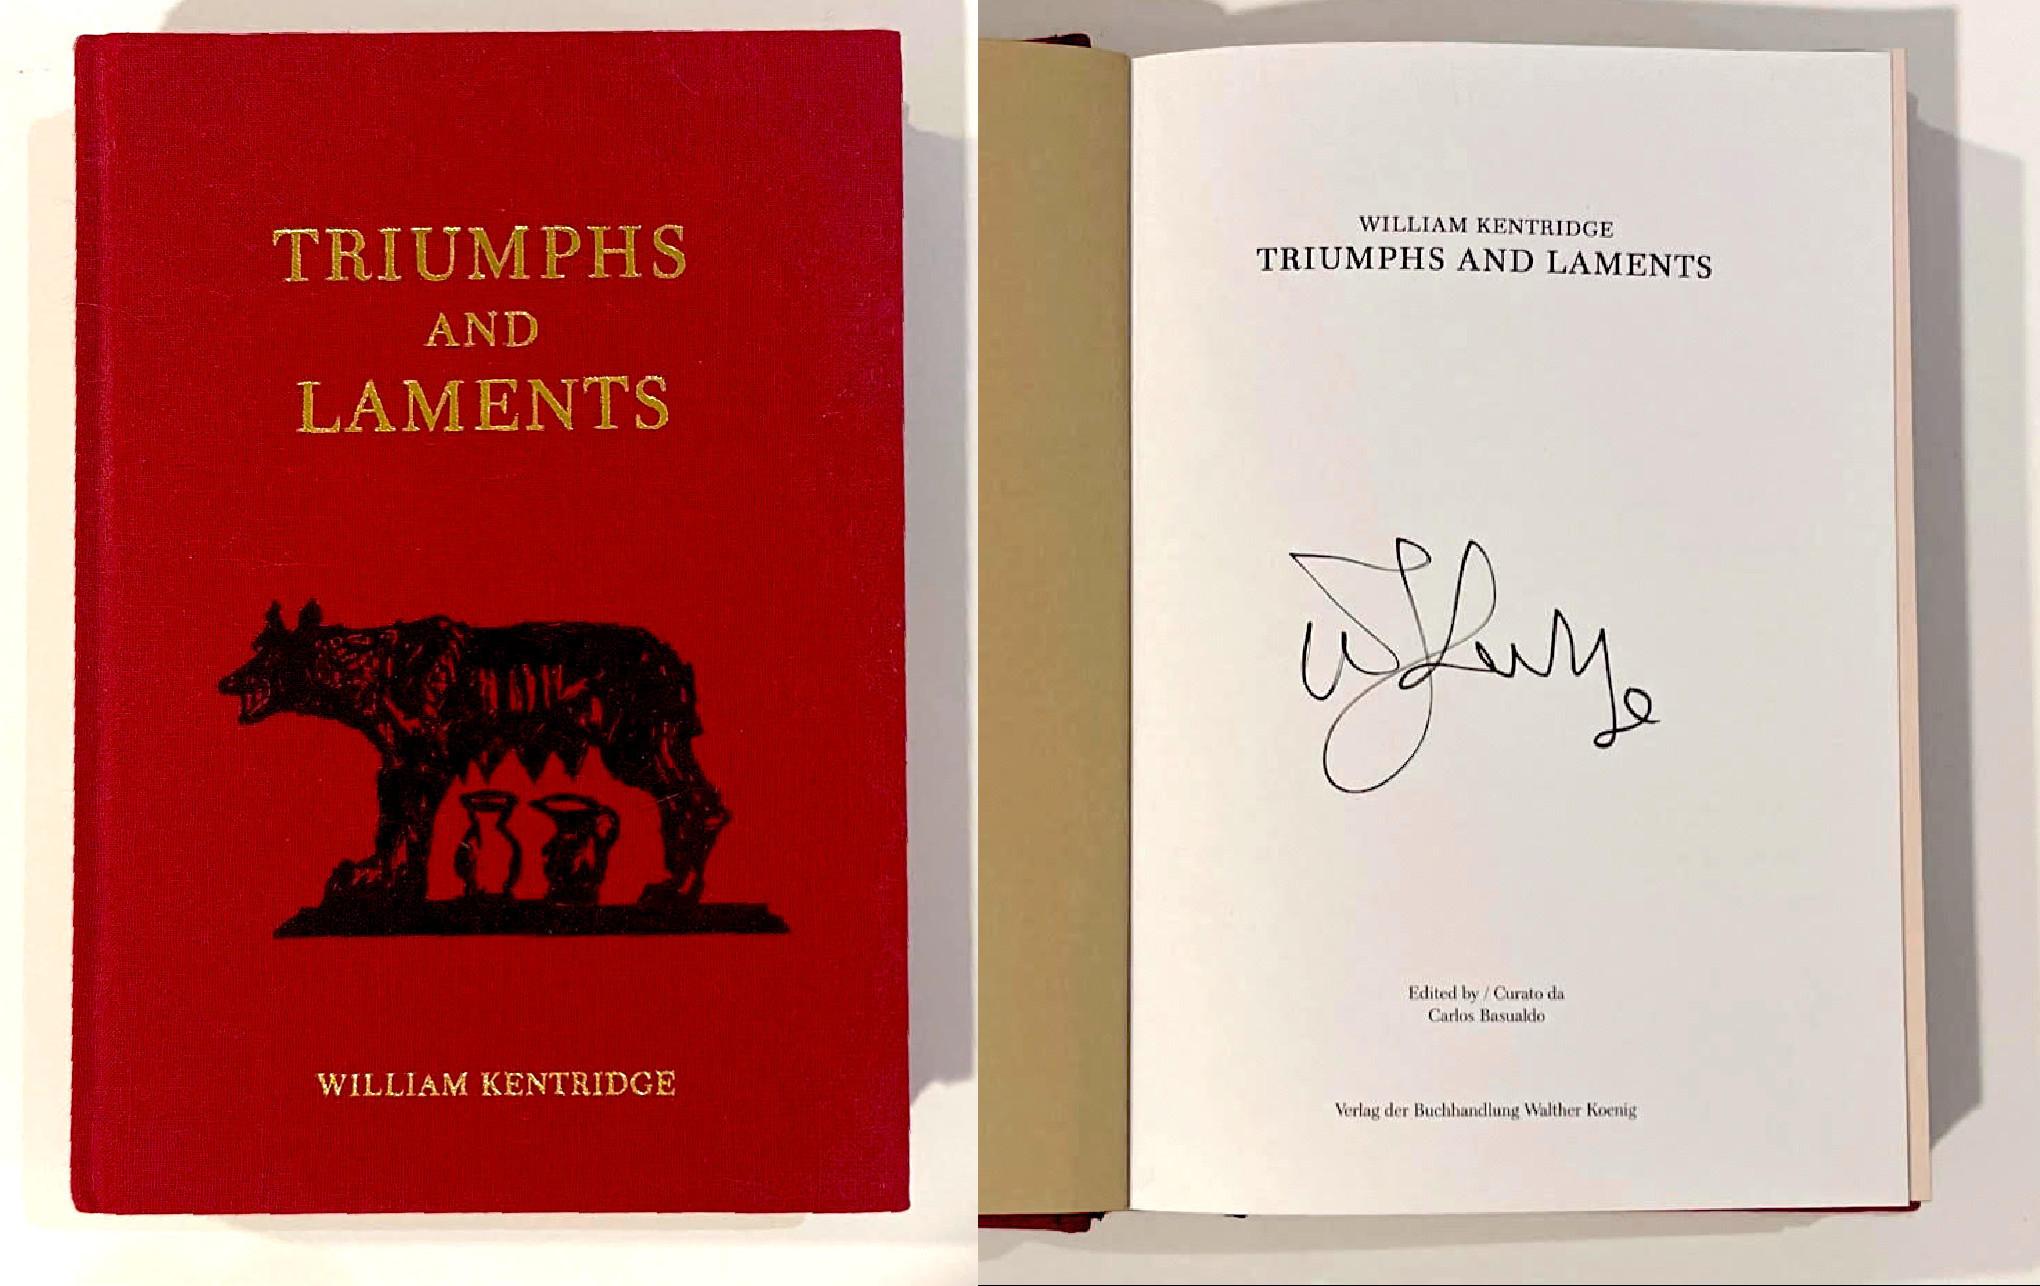 William Kentridge: Triumphs & Laments (Hand signed by William Kentridge), 2018
Hardback monograph with cloth cover and no dust jacket as issued (hand signed by William Kentridge)
Boldly signed in dark ink by William Kentridge on the title page
8 × 5